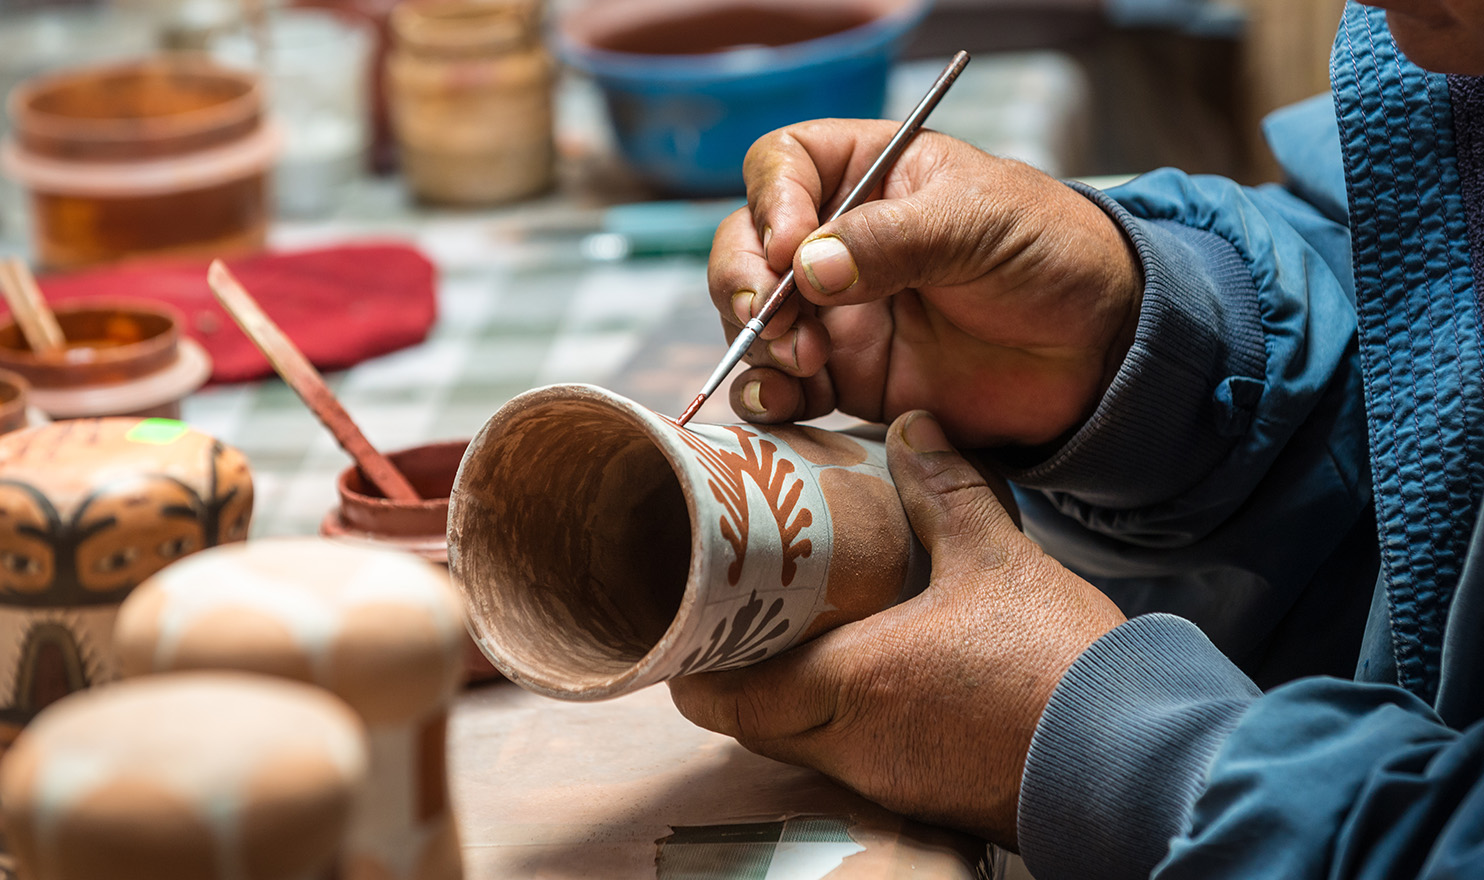 An artisan is very carefully painting a design onto a handcrafted piece of pottery.